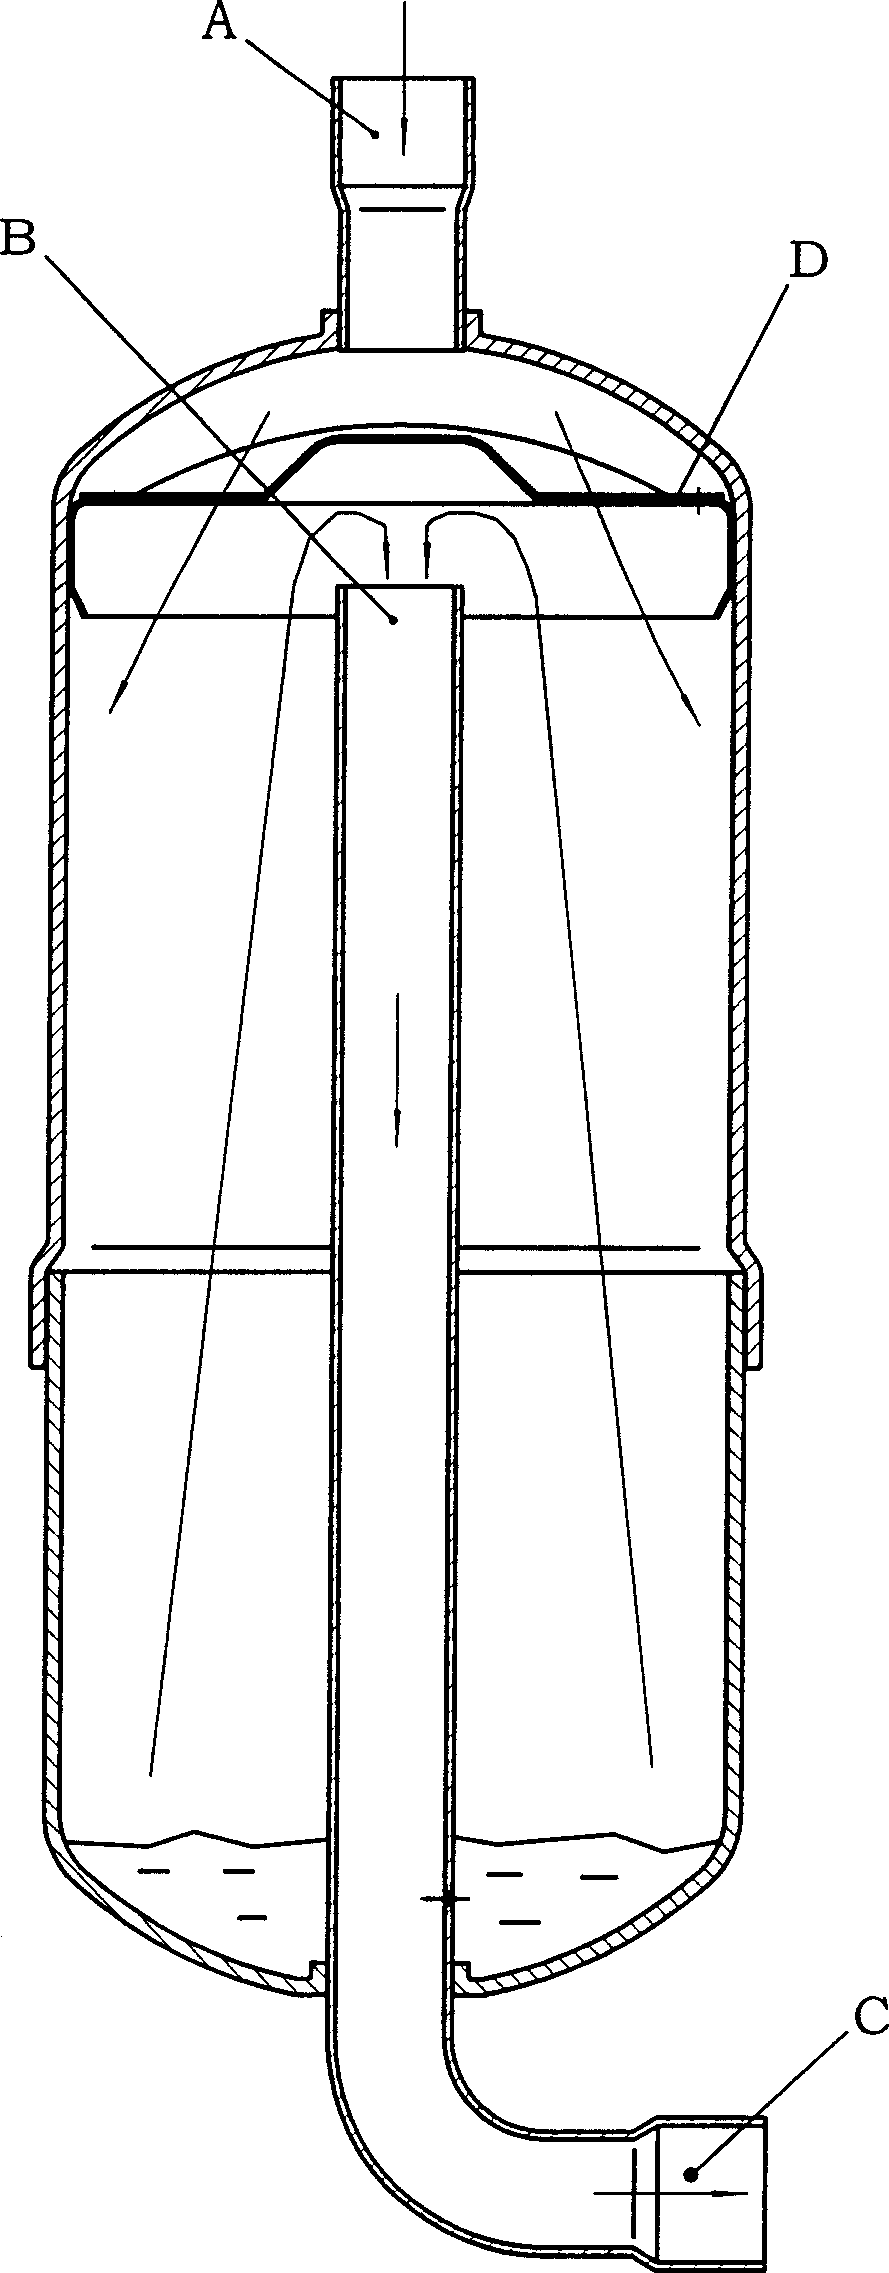 Liquid storing device for storing refrigrant in device